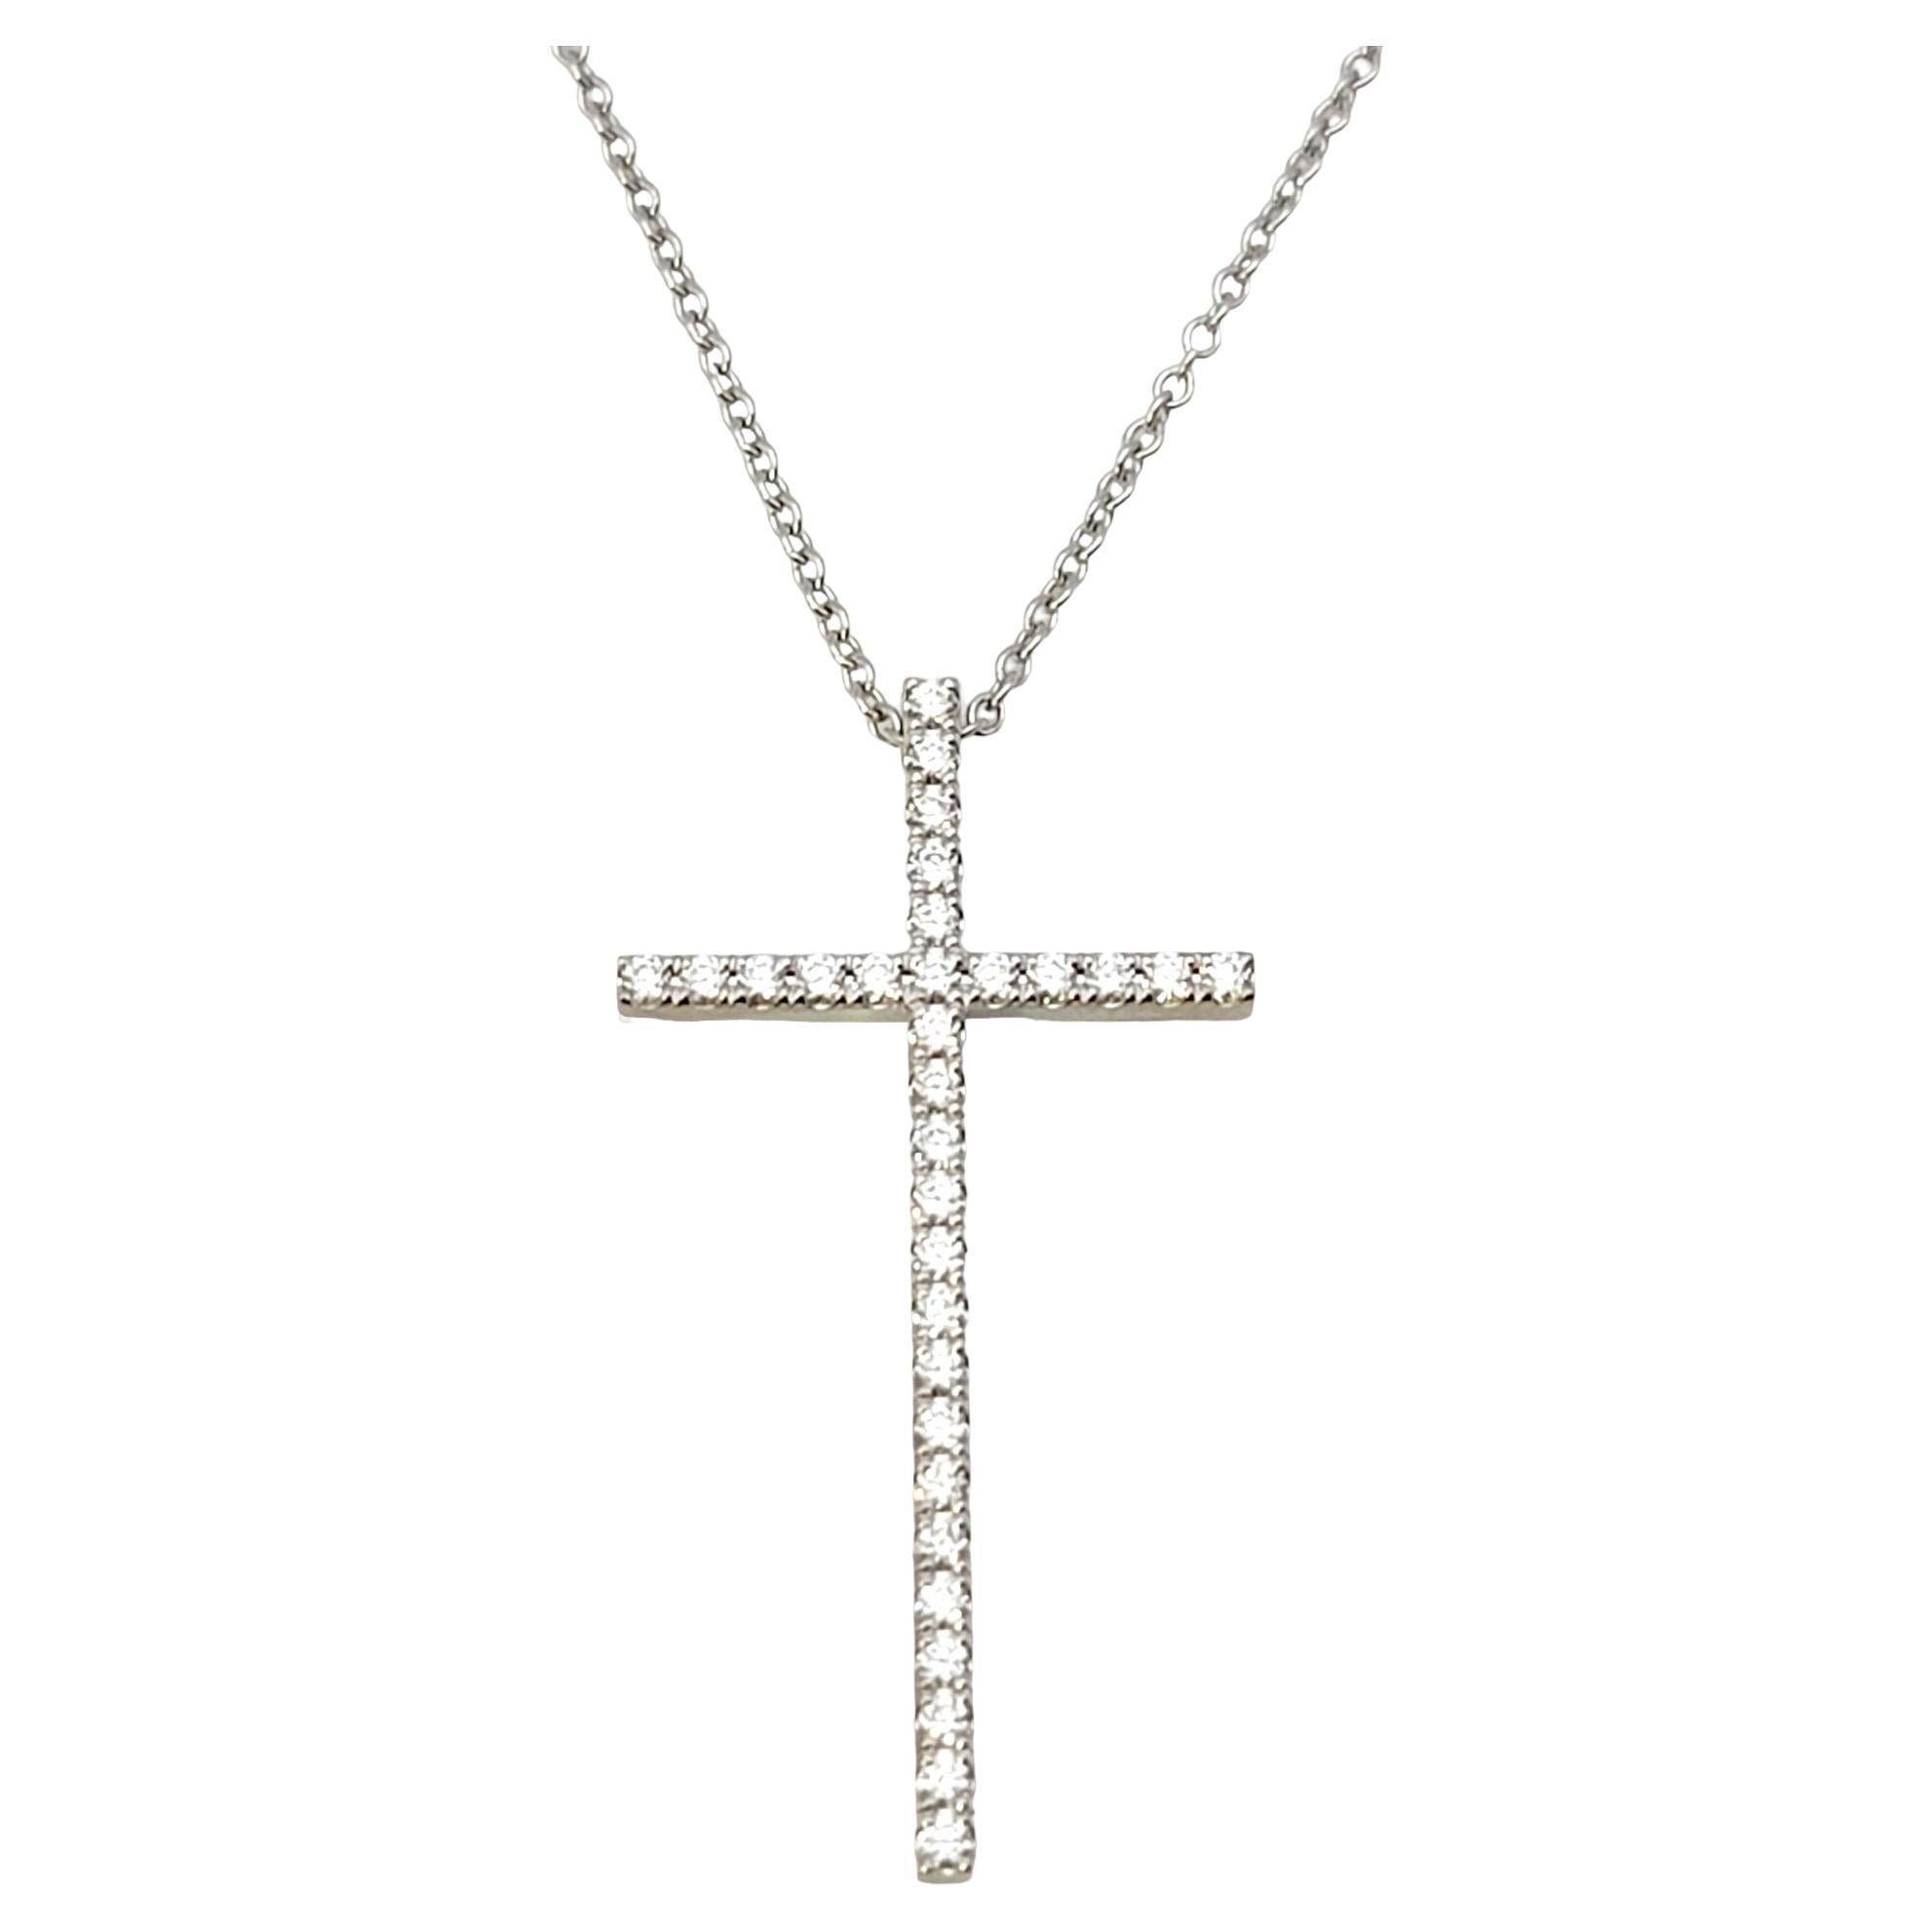 Tiffany & Co. Narrow Cross Pendant Necklace with Diamonds in 18 Karat White Gold For Sale